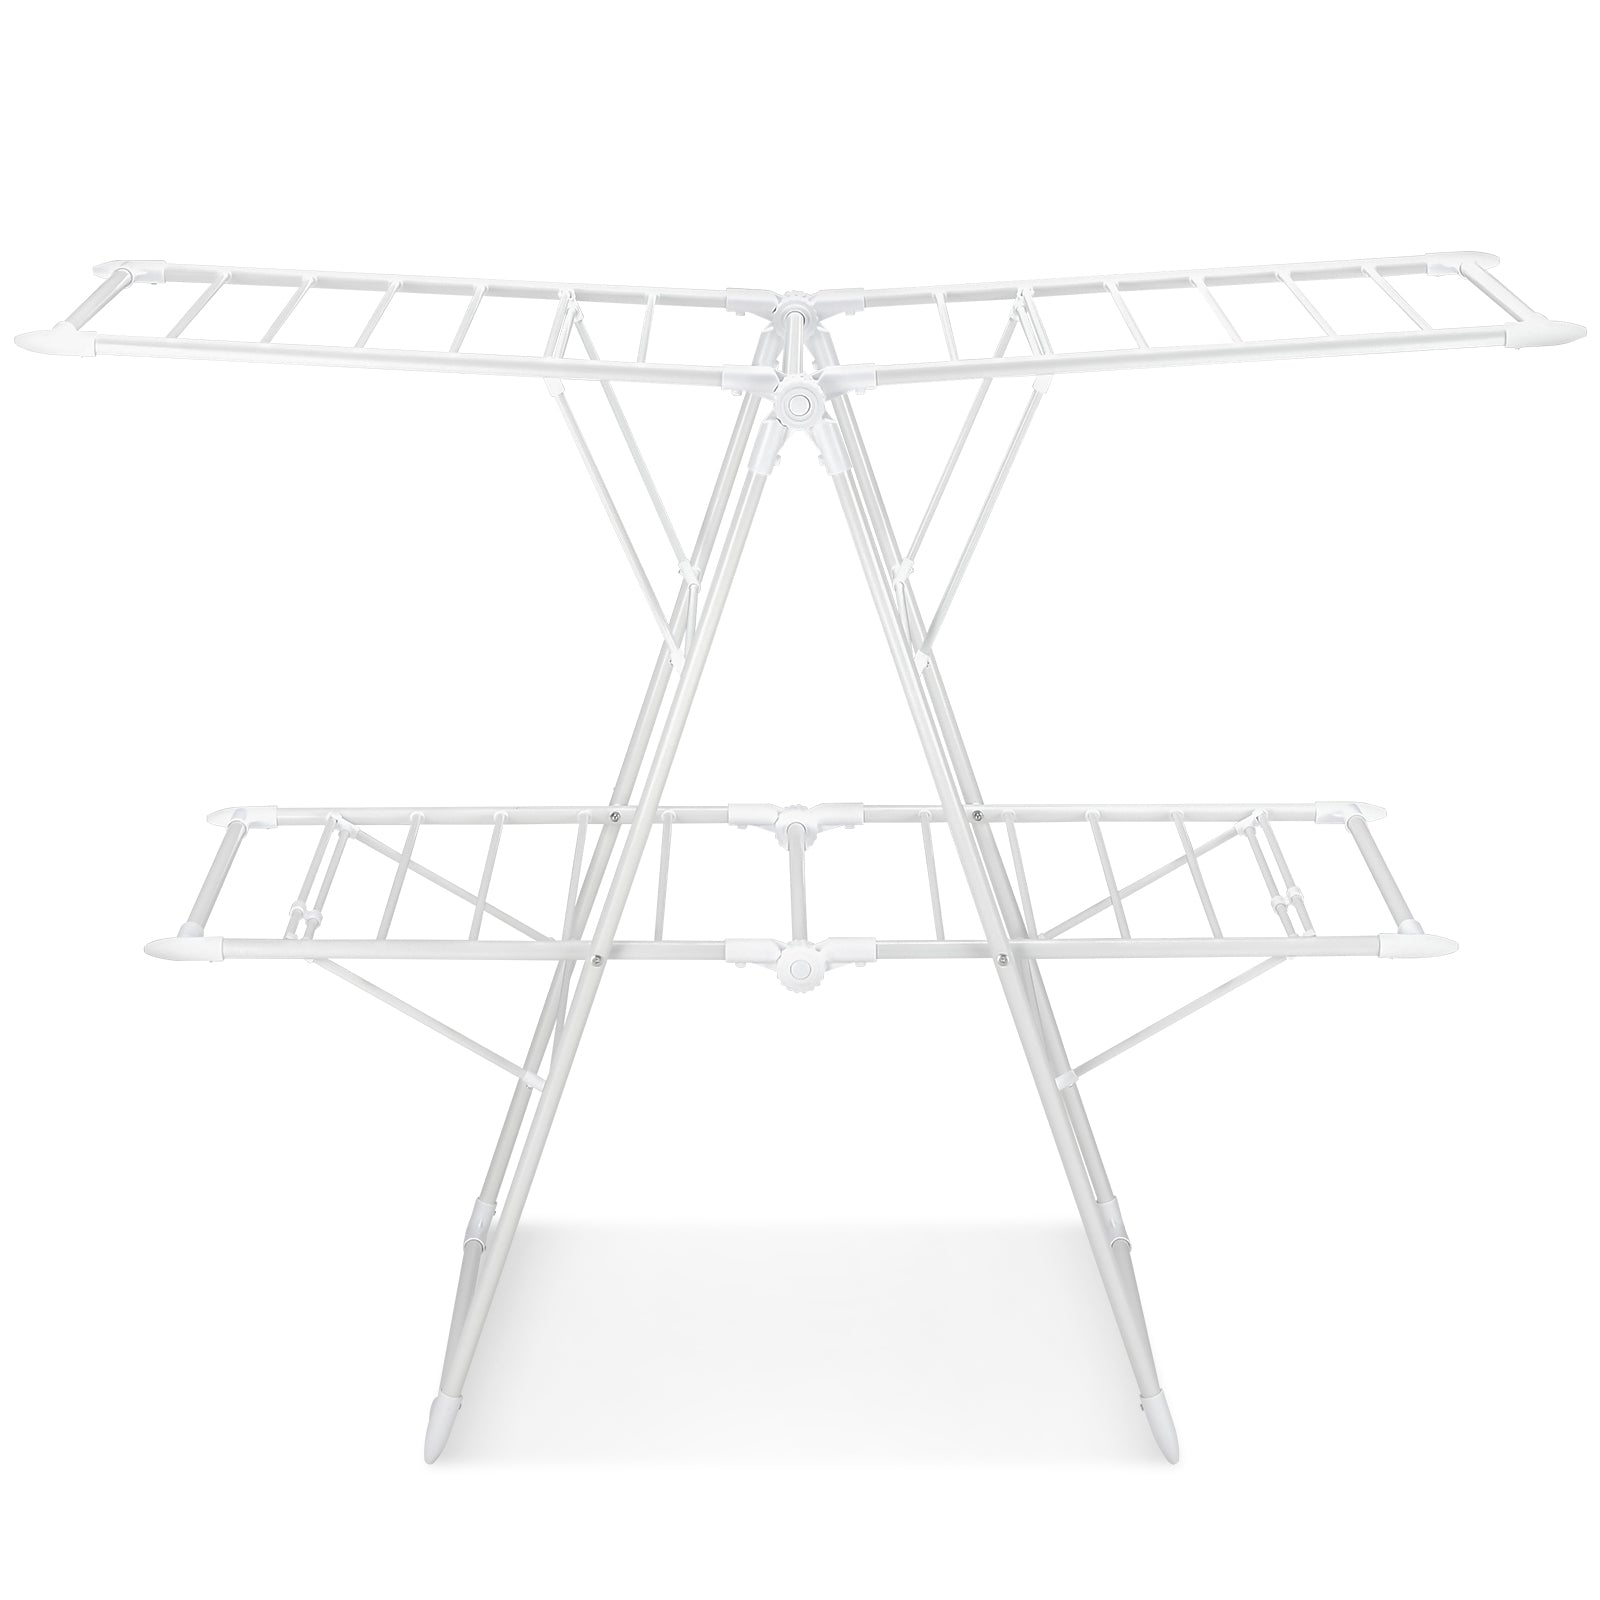 Drying Rack, Foldable Drying Rack, Foldable Clothes Drying Rack with 28 Hanging Rails, White, Costway, 3